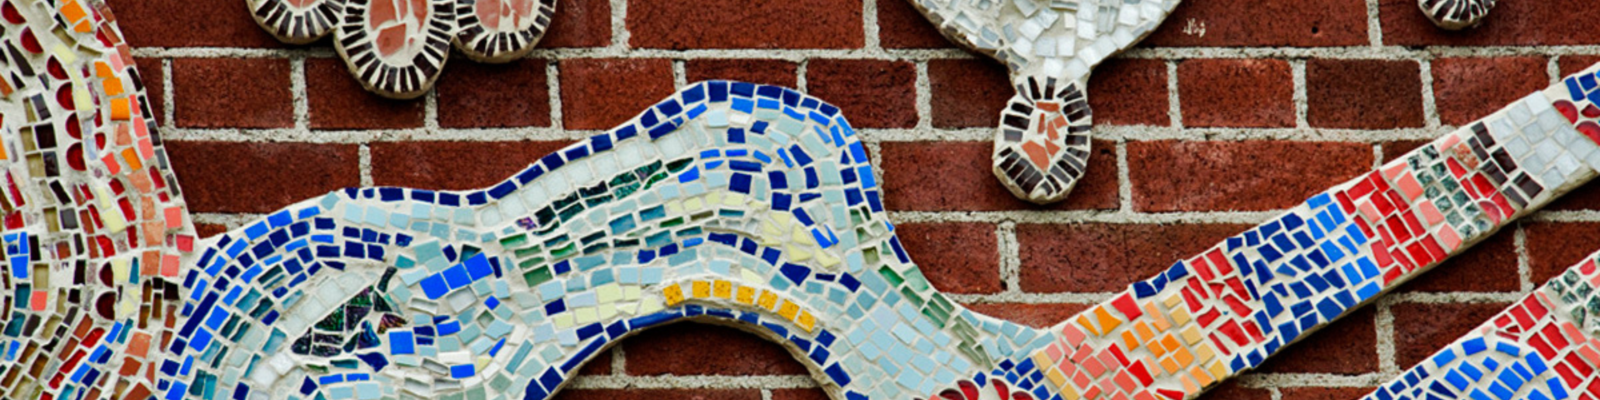 Close-up of a large colourful mosaic installed on an exterior brick wall, depicting abstract shapes and floating milkweed pods.